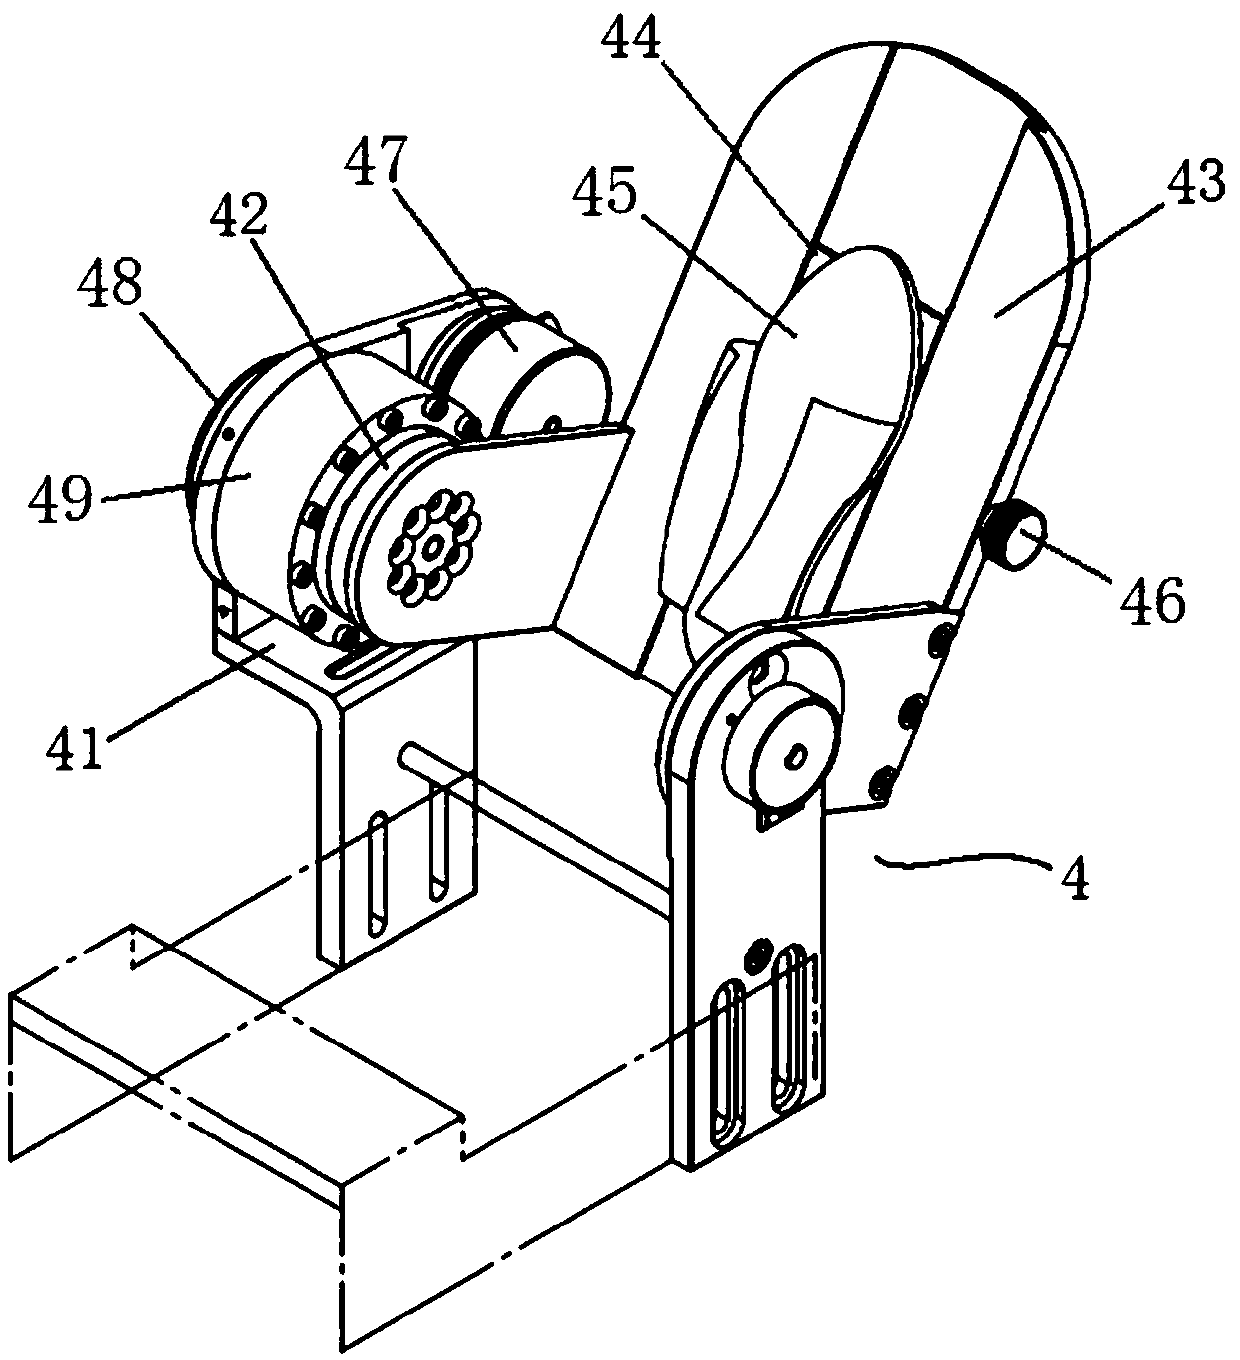 An ankle joint rehabilitation device capable of adjusting leg posture